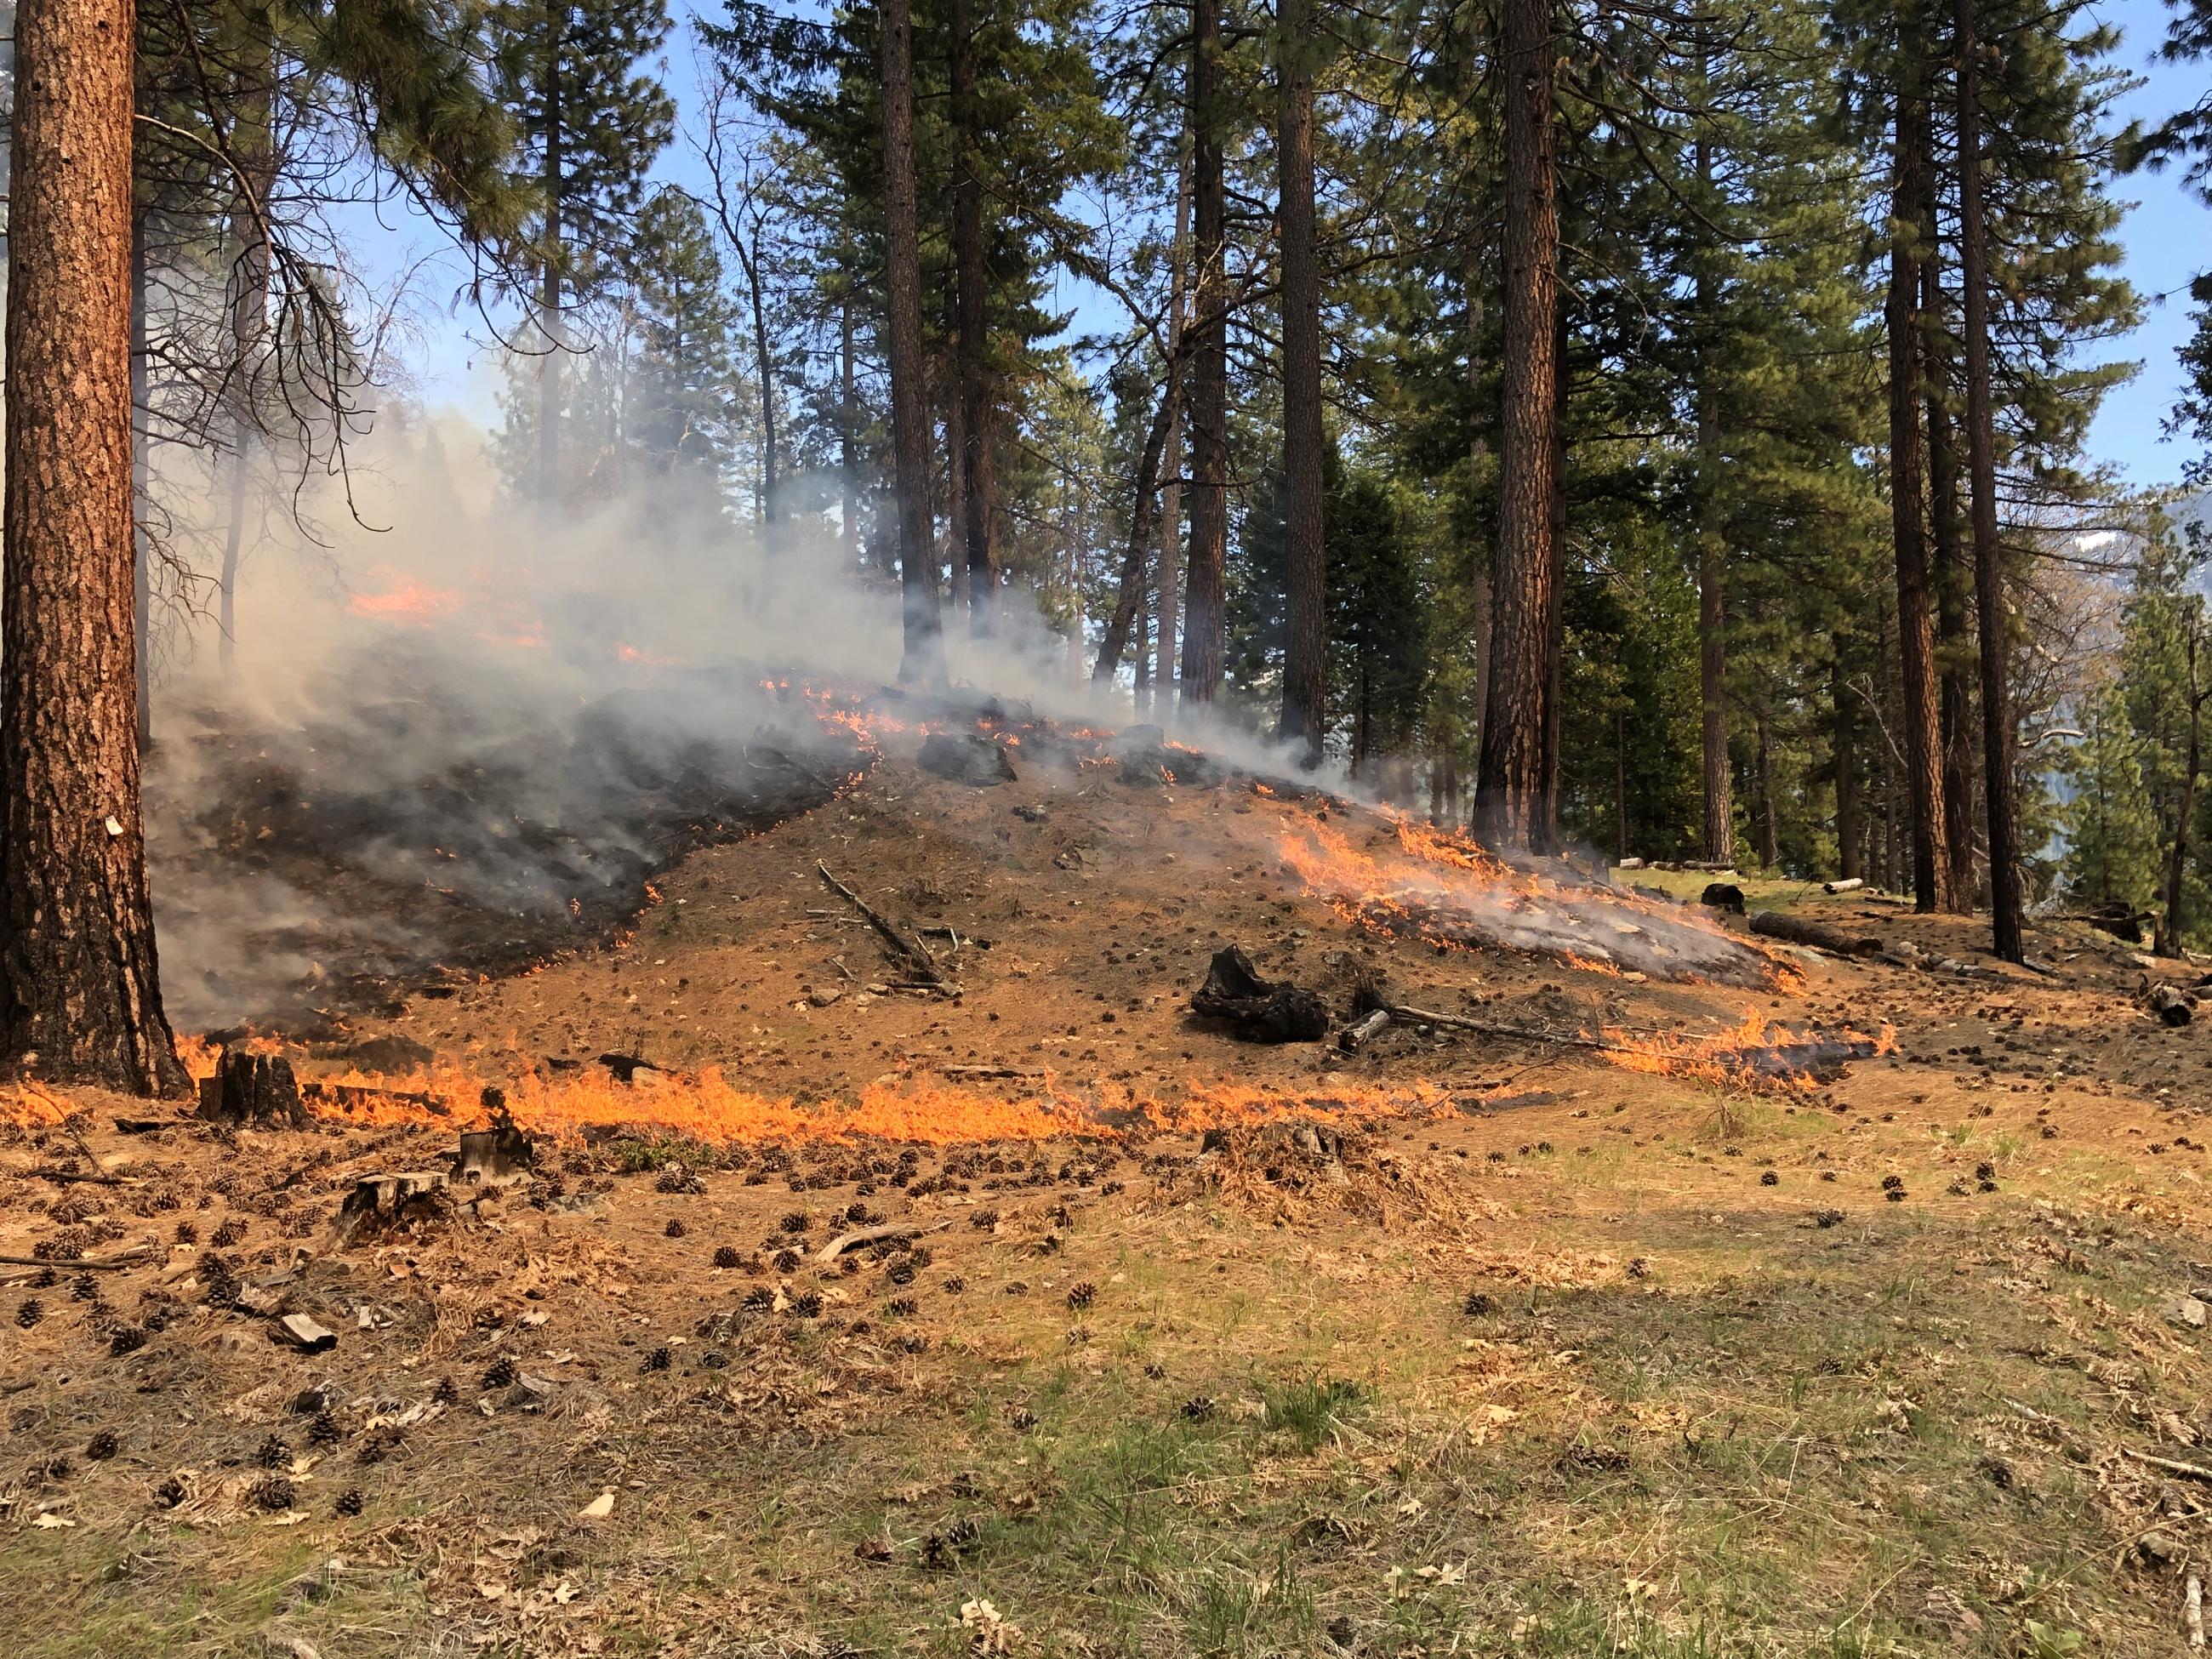 Low flames consume surface litter in a ponderosa pine forest.